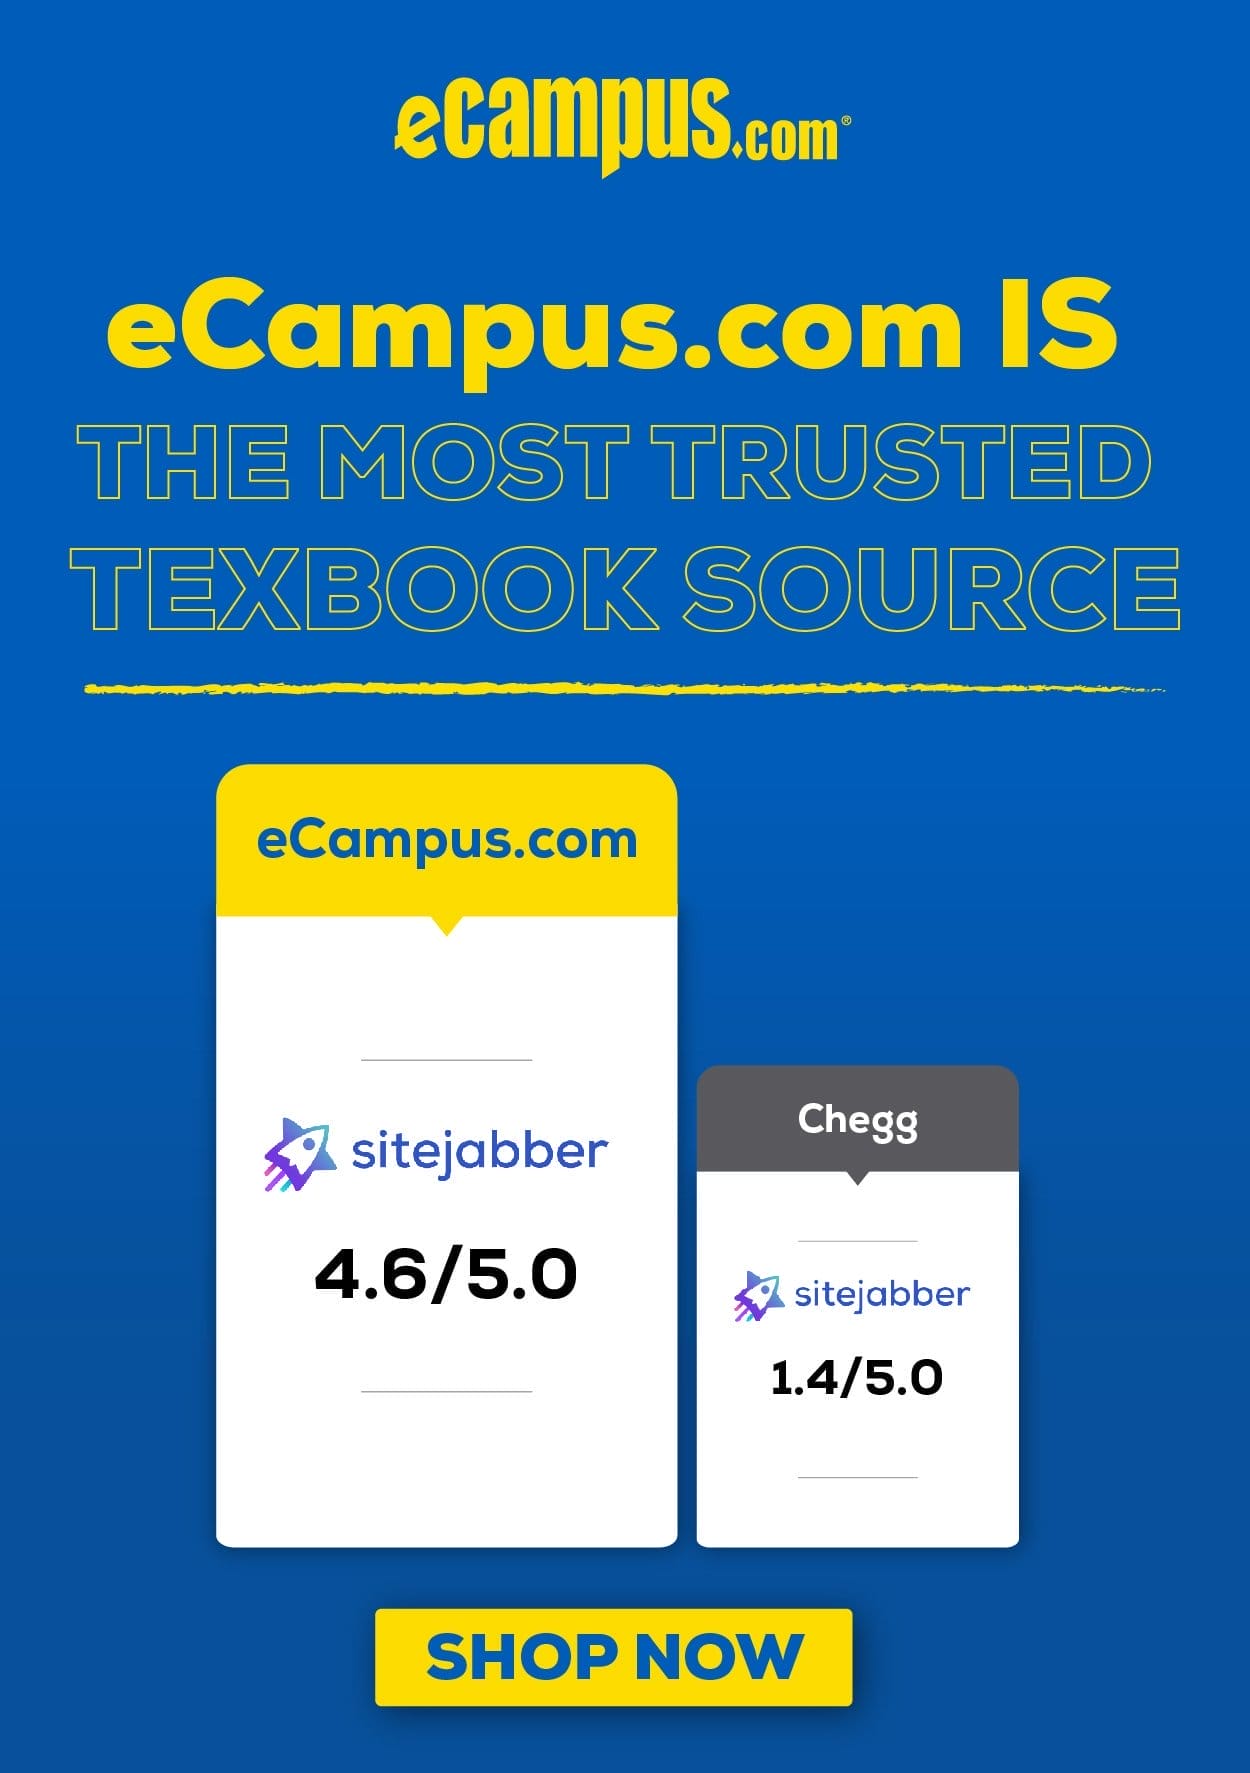 eCampus.com Logo | Solid Blue Background with eCampus.com SiteJabber Logo 4.6/5.0 and Chegg SiteJabber Logo 1.4/5.0 | eCampus.com IS The Most Trusted Textbook Source | eCampus.com 4.6/5.0 Chegg 1.4/5.0